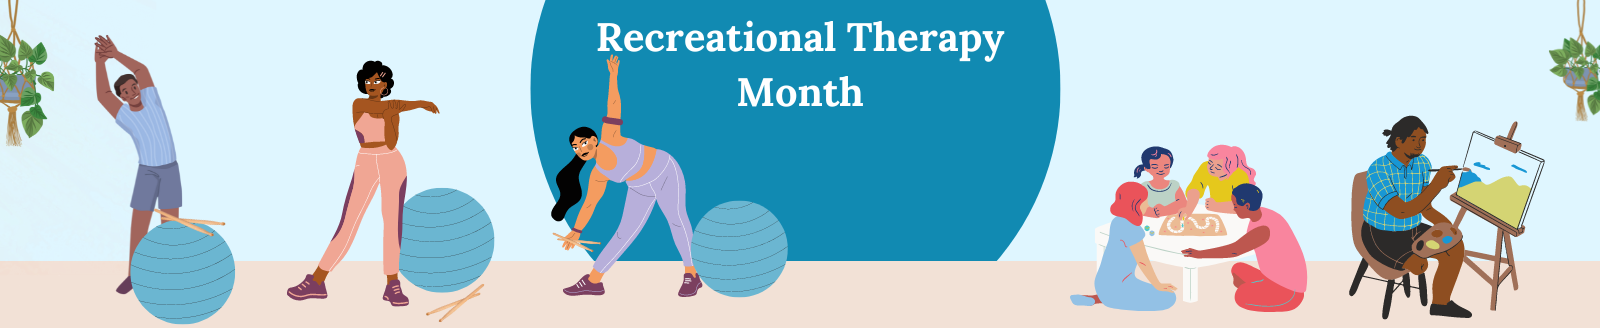 Recreational Therapy Month 2